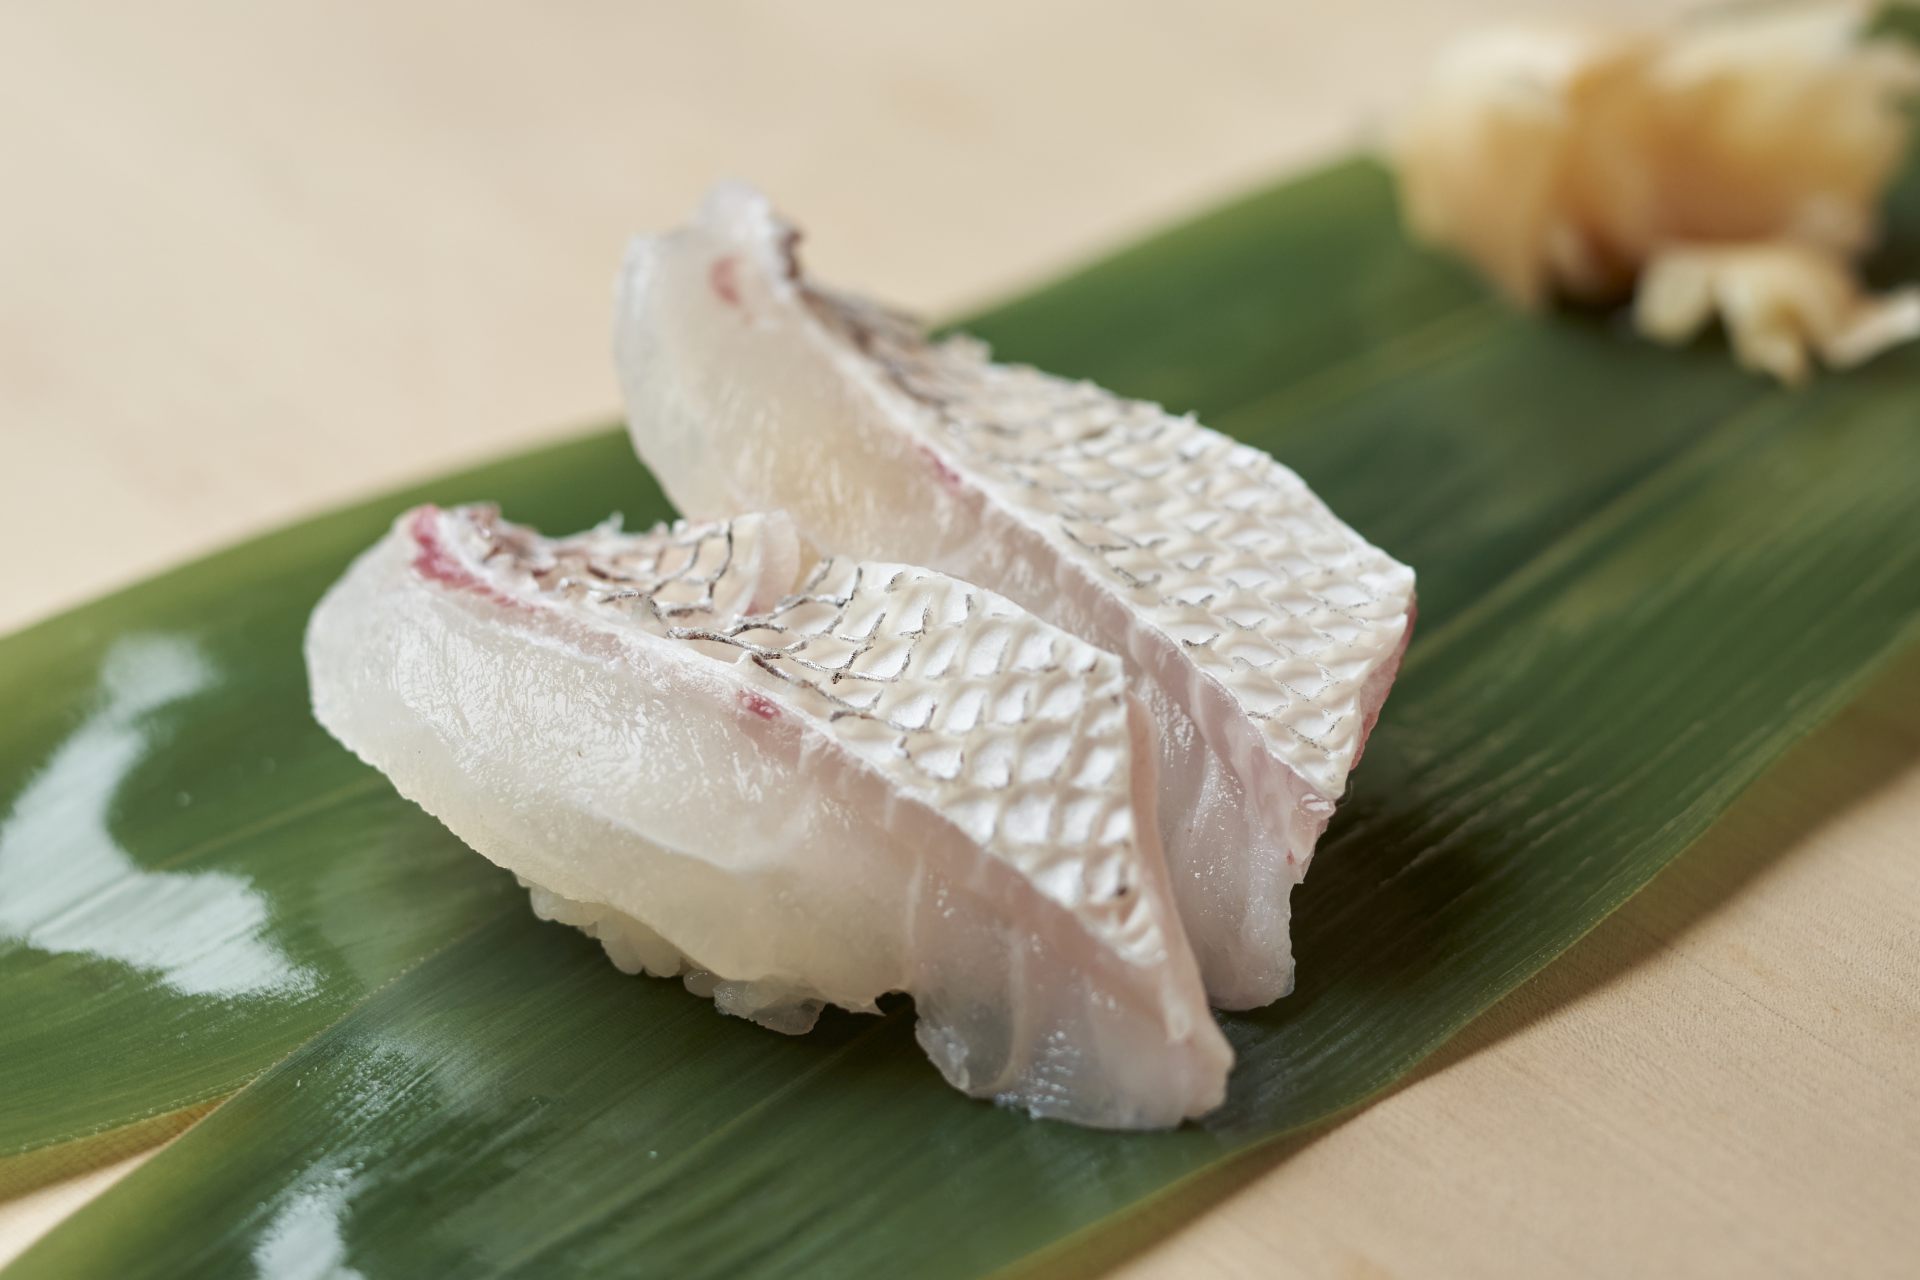 Sea bream is Naruto’s specialty. The wild harvested fish has a firm texture and complex flavor.